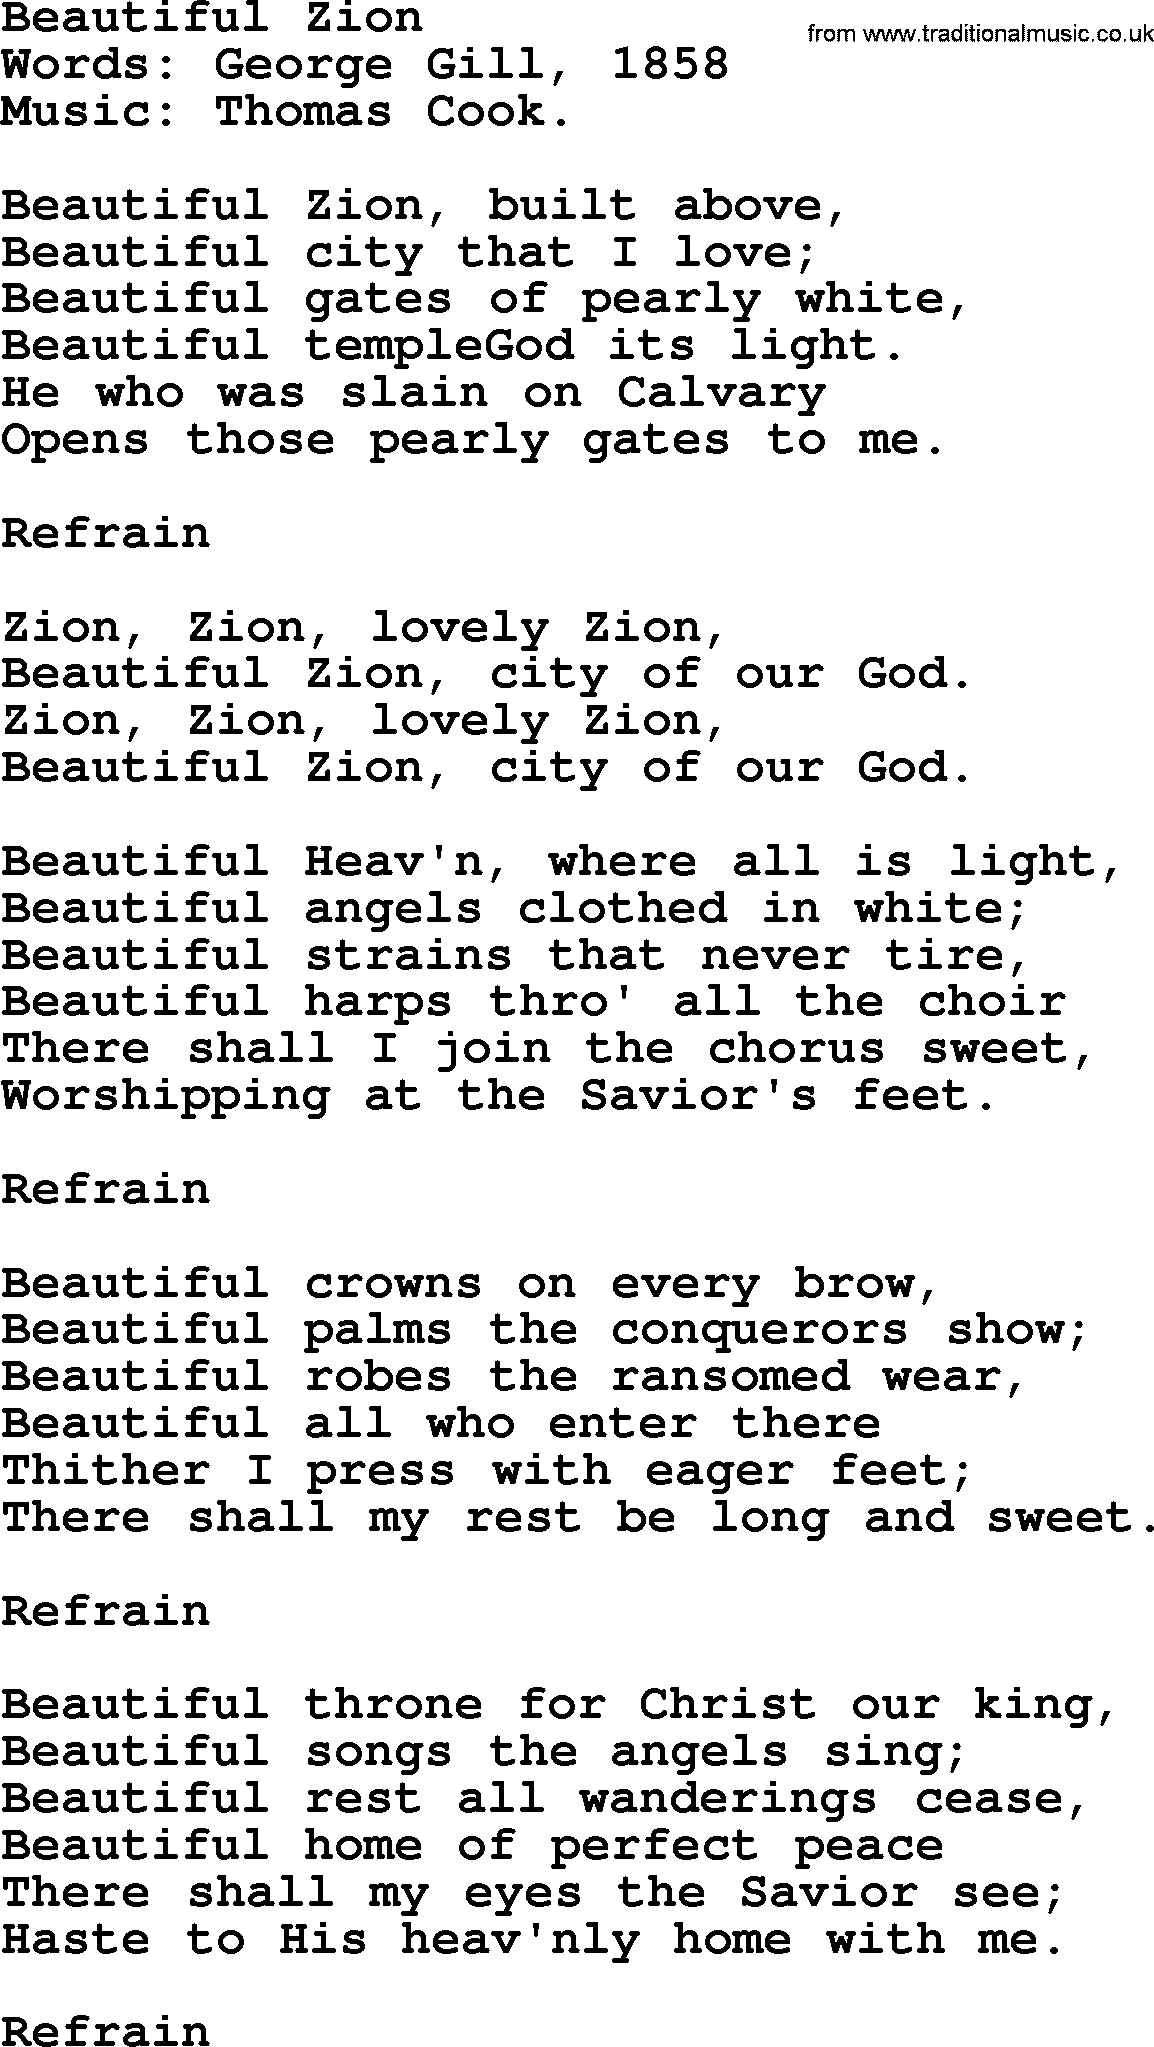 Songs and Hymns about Heaven: Beautiful Zion lyrics with PDF